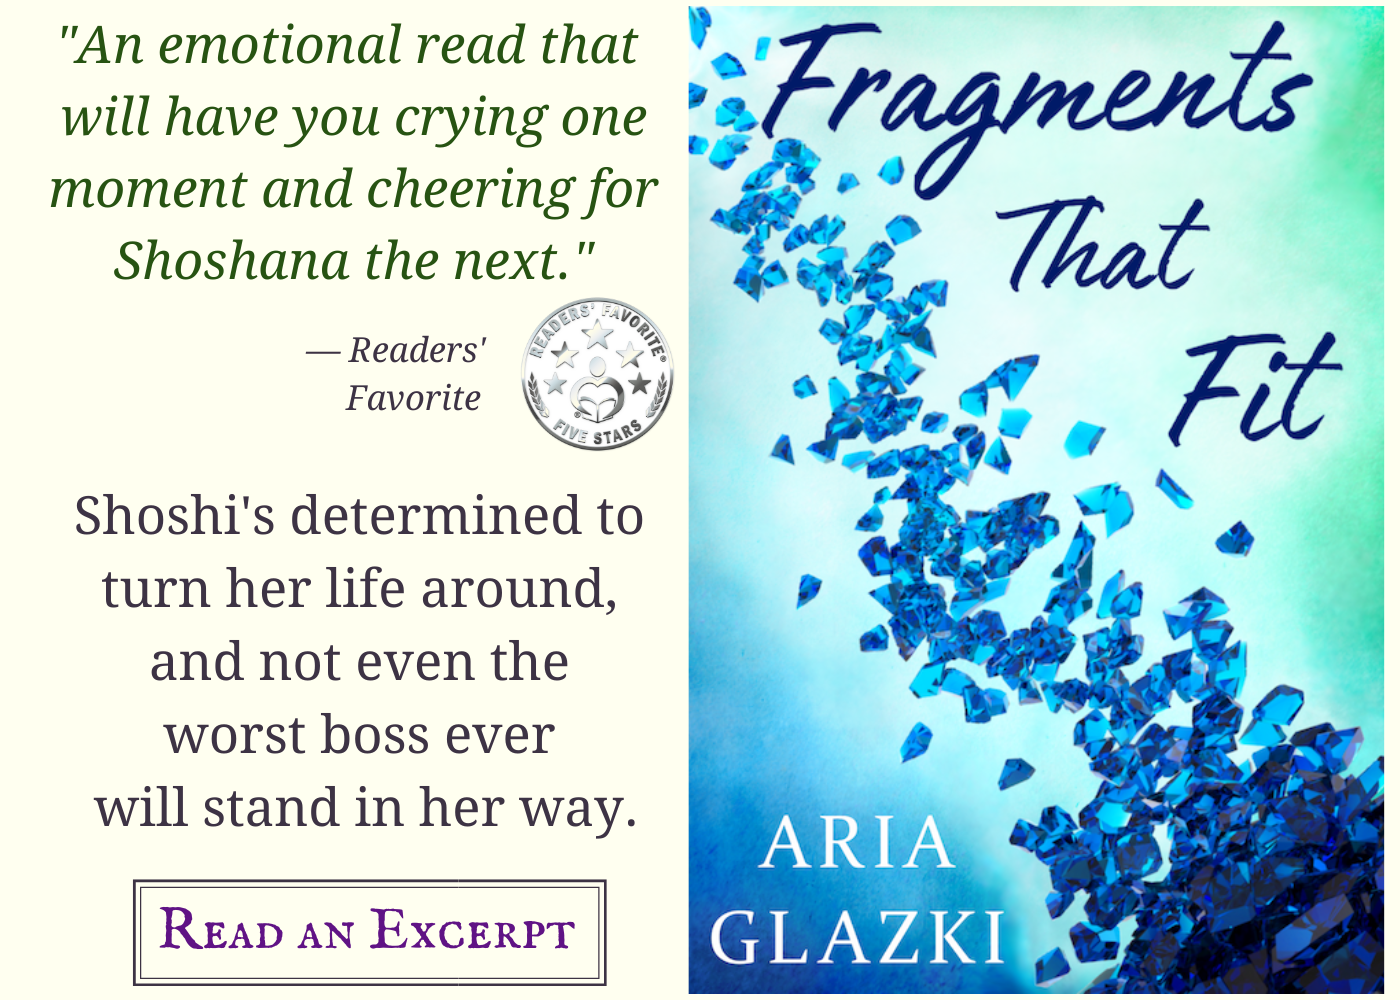 Image card for Fragments That Fit by Aria Glazki, featuring book cover and text: "An emotional read that will have you crying one moment and cheering for Shoshana the next." —Readers' Favorite with 5-star review seal. Shoshi's determind to turn he life around, and not even the worst boss ever will stand in her way. Read an excerpt.